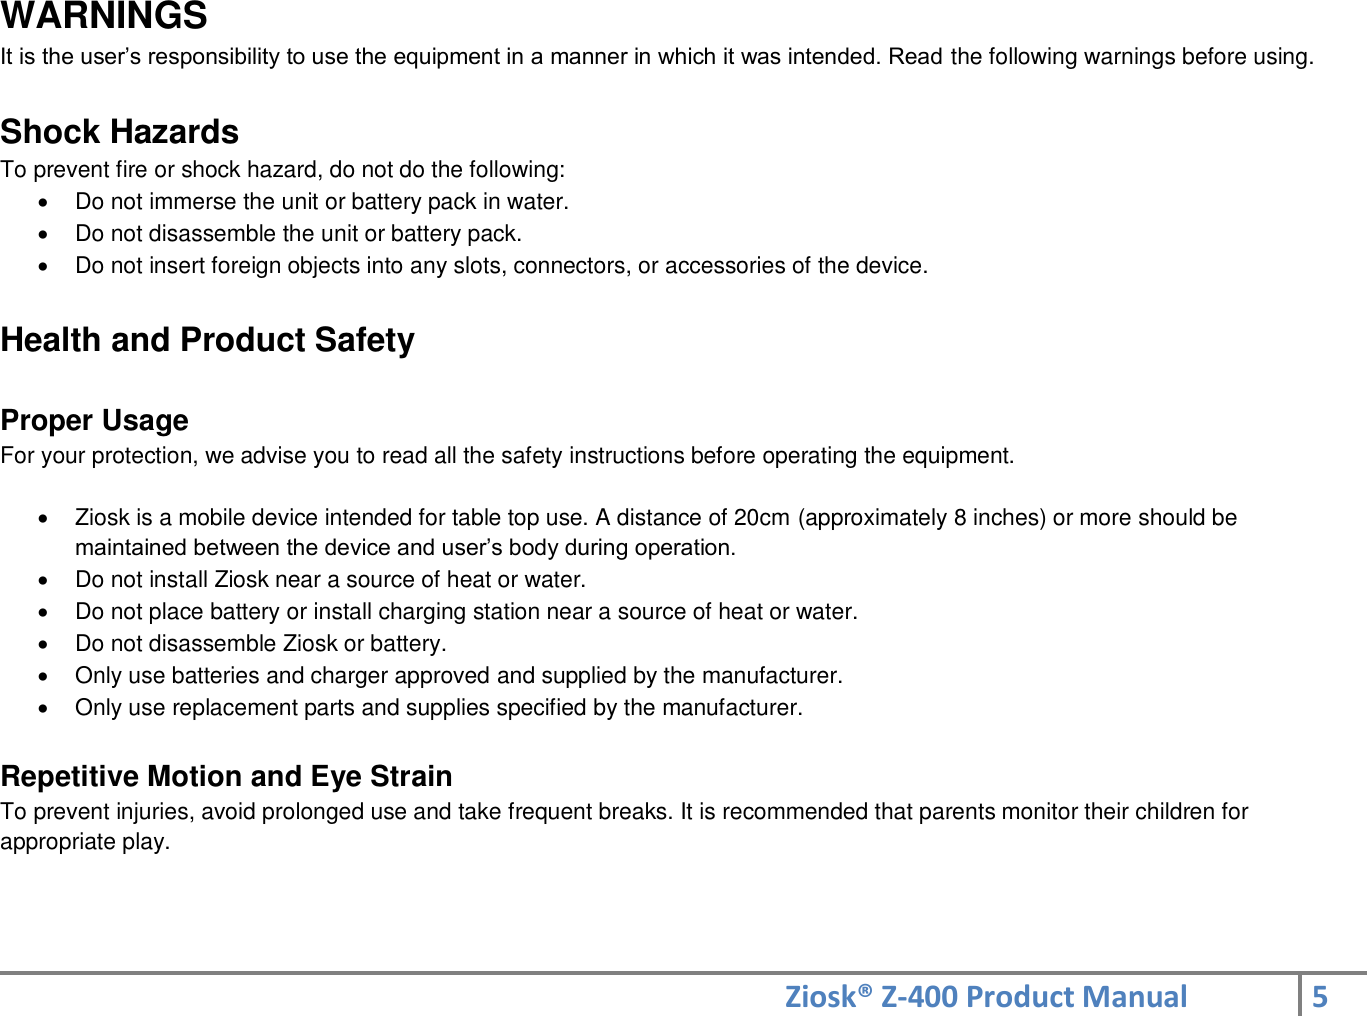 Ziosk® Z-400 Product Manual 5  WARNINGS It is the user’s responsibility to use the equipment in a manner in which it was intended. Read the following warnings before using.   Shock Hazards To prevent fire or shock hazard, do not do the following:   Do not immerse the unit or battery pack in water.   Do not disassemble the unit or battery pack.   Do not insert foreign objects into any slots, connectors, or accessories of the device.  Health and Product Safety  Proper Usage For your protection, we advise you to read all the safety instructions before operating the equipment.    Ziosk is a mobile device intended for table top use. A distance of 20cm (approximately 8 inches) or more should be maintained between the device and user’s body during operation.   Do not install Ziosk near a source of heat or water.   Do not place battery or install charging station near a source of heat or water.   Do not disassemble Ziosk or battery.   Only use batteries and charger approved and supplied by the manufacturer.   Only use replacement parts and supplies specified by the manufacturer.  Repetitive Motion and Eye Strain  To prevent injuries, avoid prolonged use and take frequent breaks. It is recommended that parents monitor their children for appropriate play.    